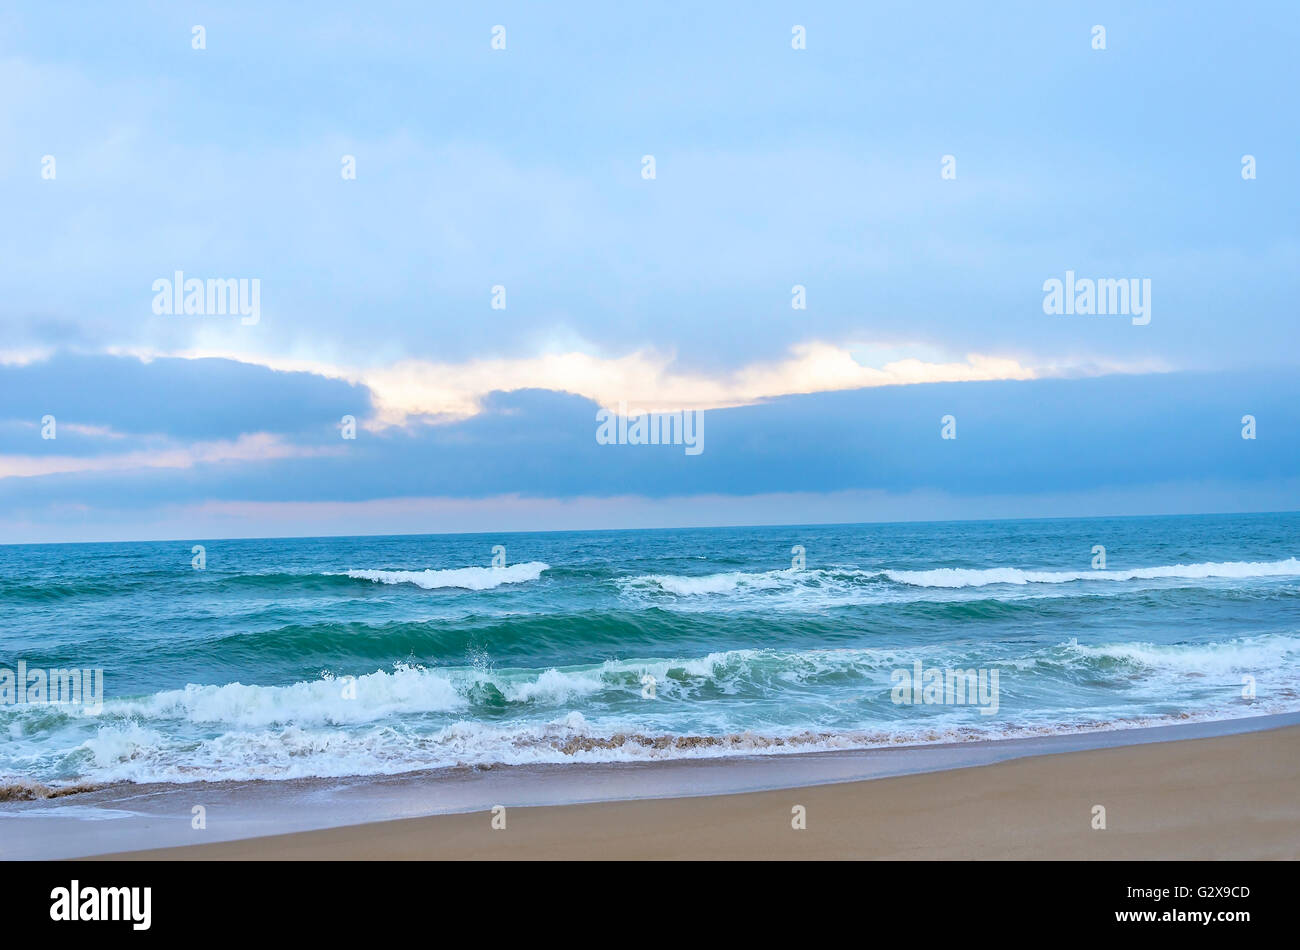 Sea with waves in the background sky. Stock Photo